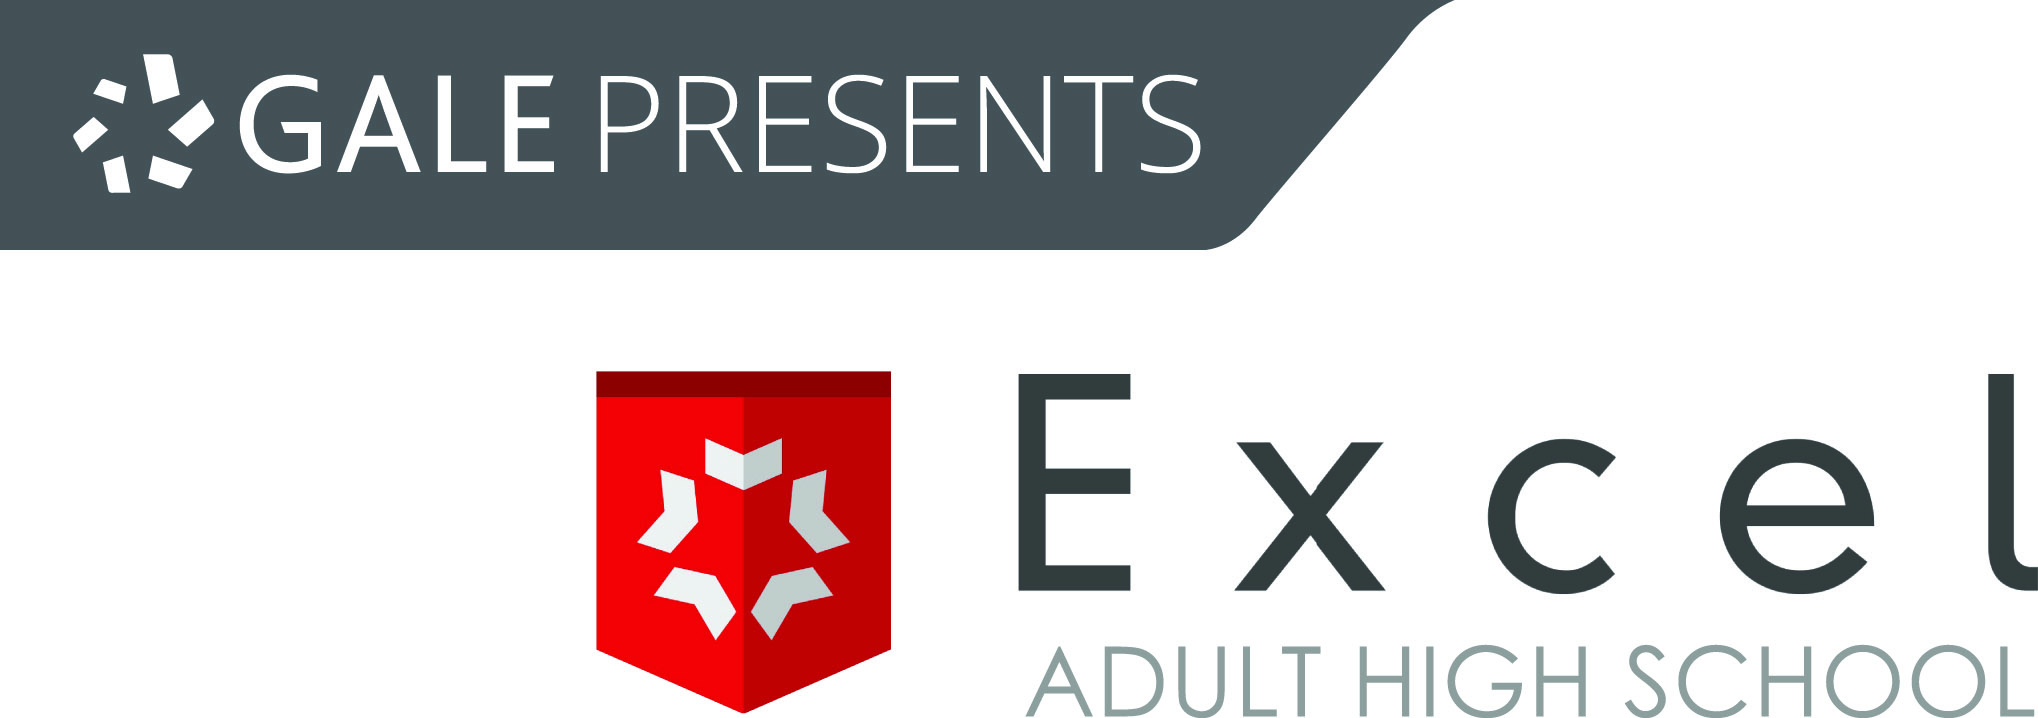 Gale Presents Excel Adult High School